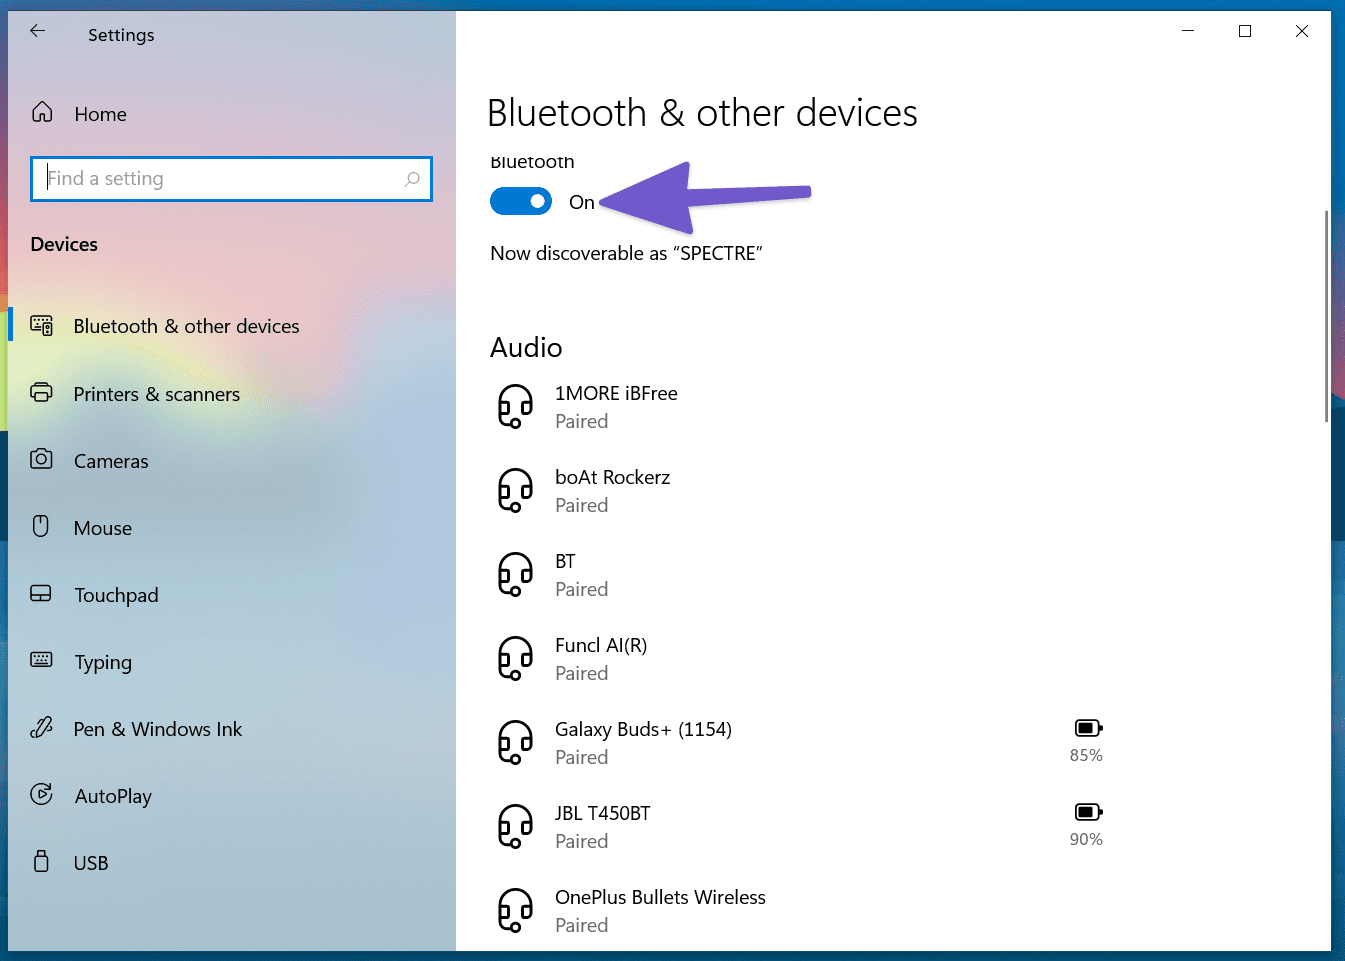 Enable bluetooth on device